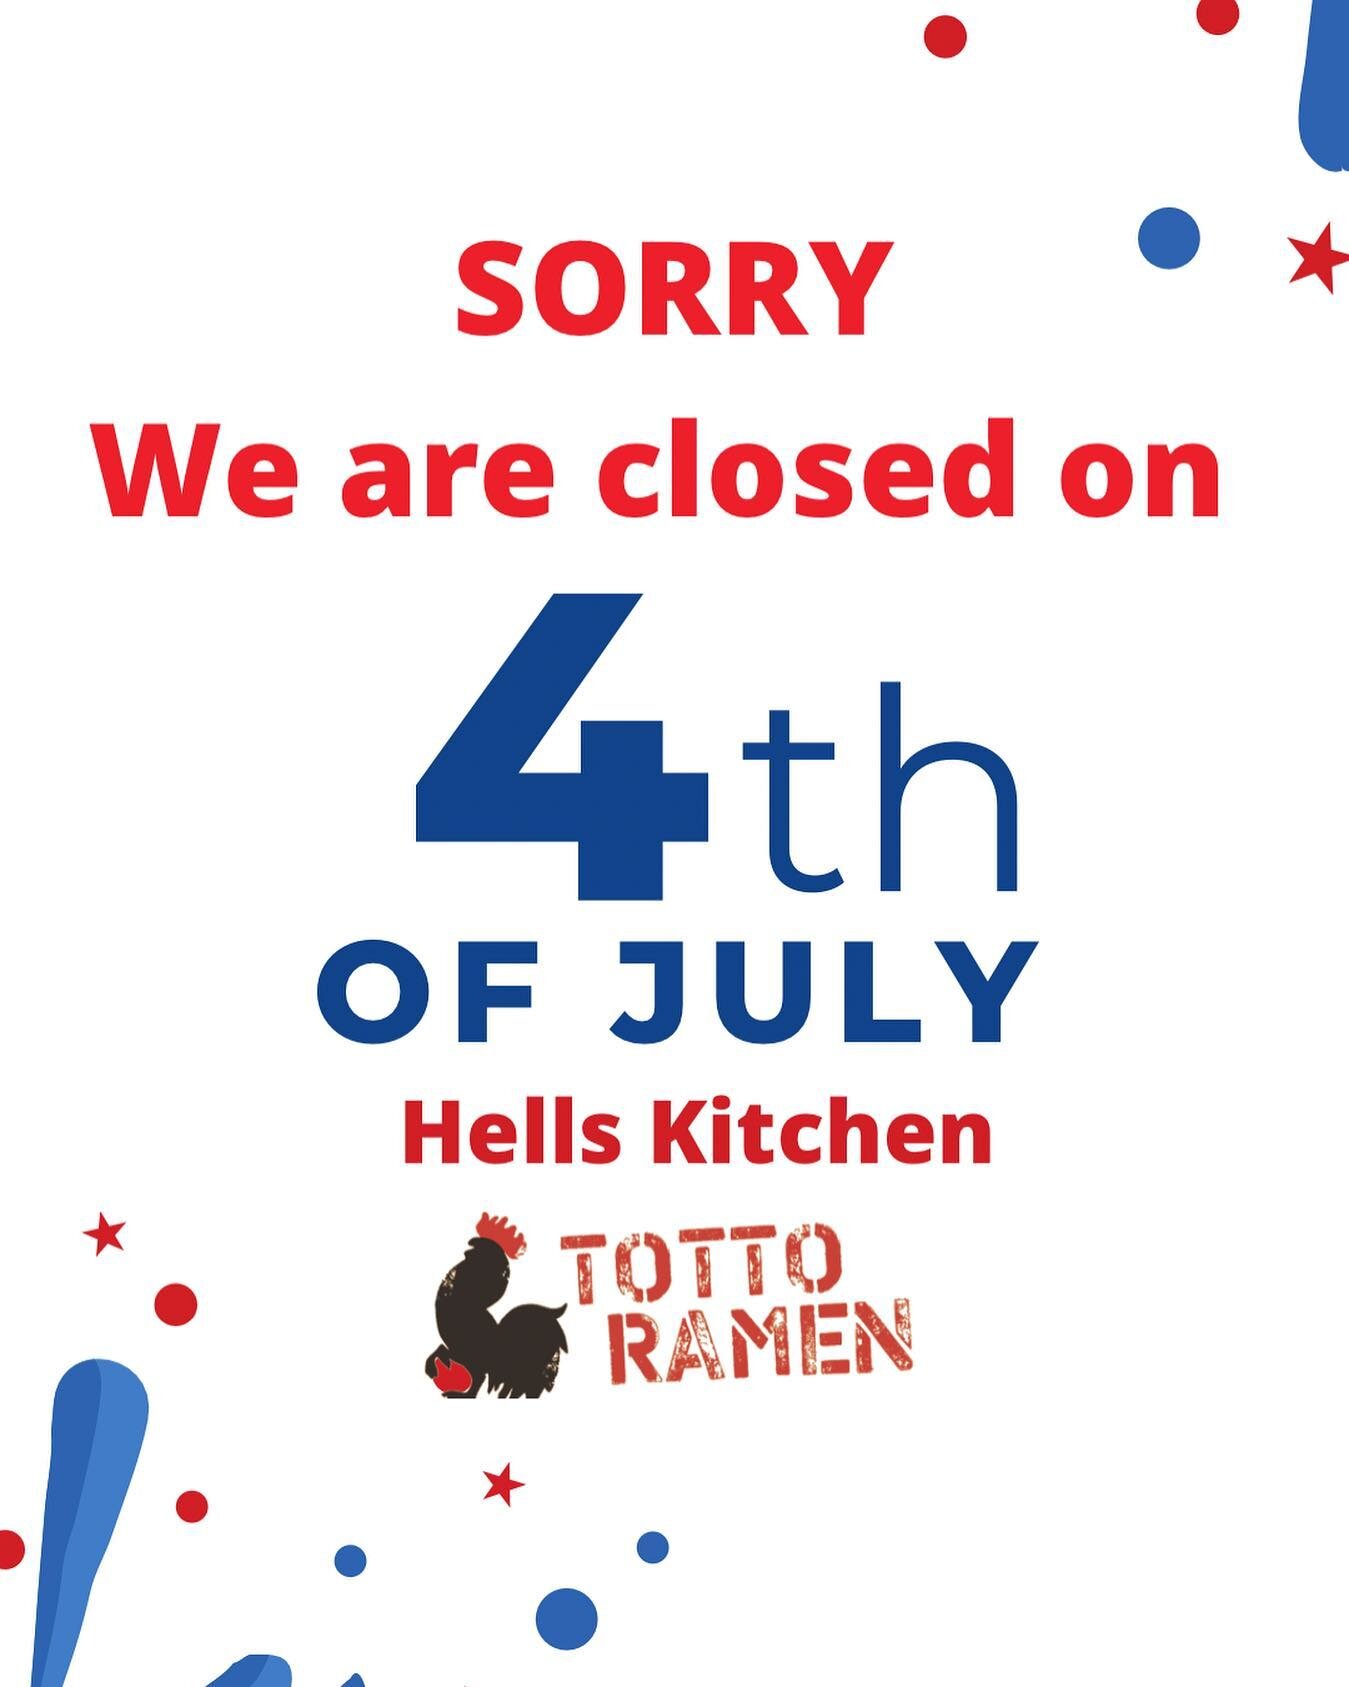 Dear customers, our Hells Kitchen (NY) location will be closed on July 4th. But the Midtown East location will be operate with regular hour. We apologize for any inconvenience. #tottoramen #july4th